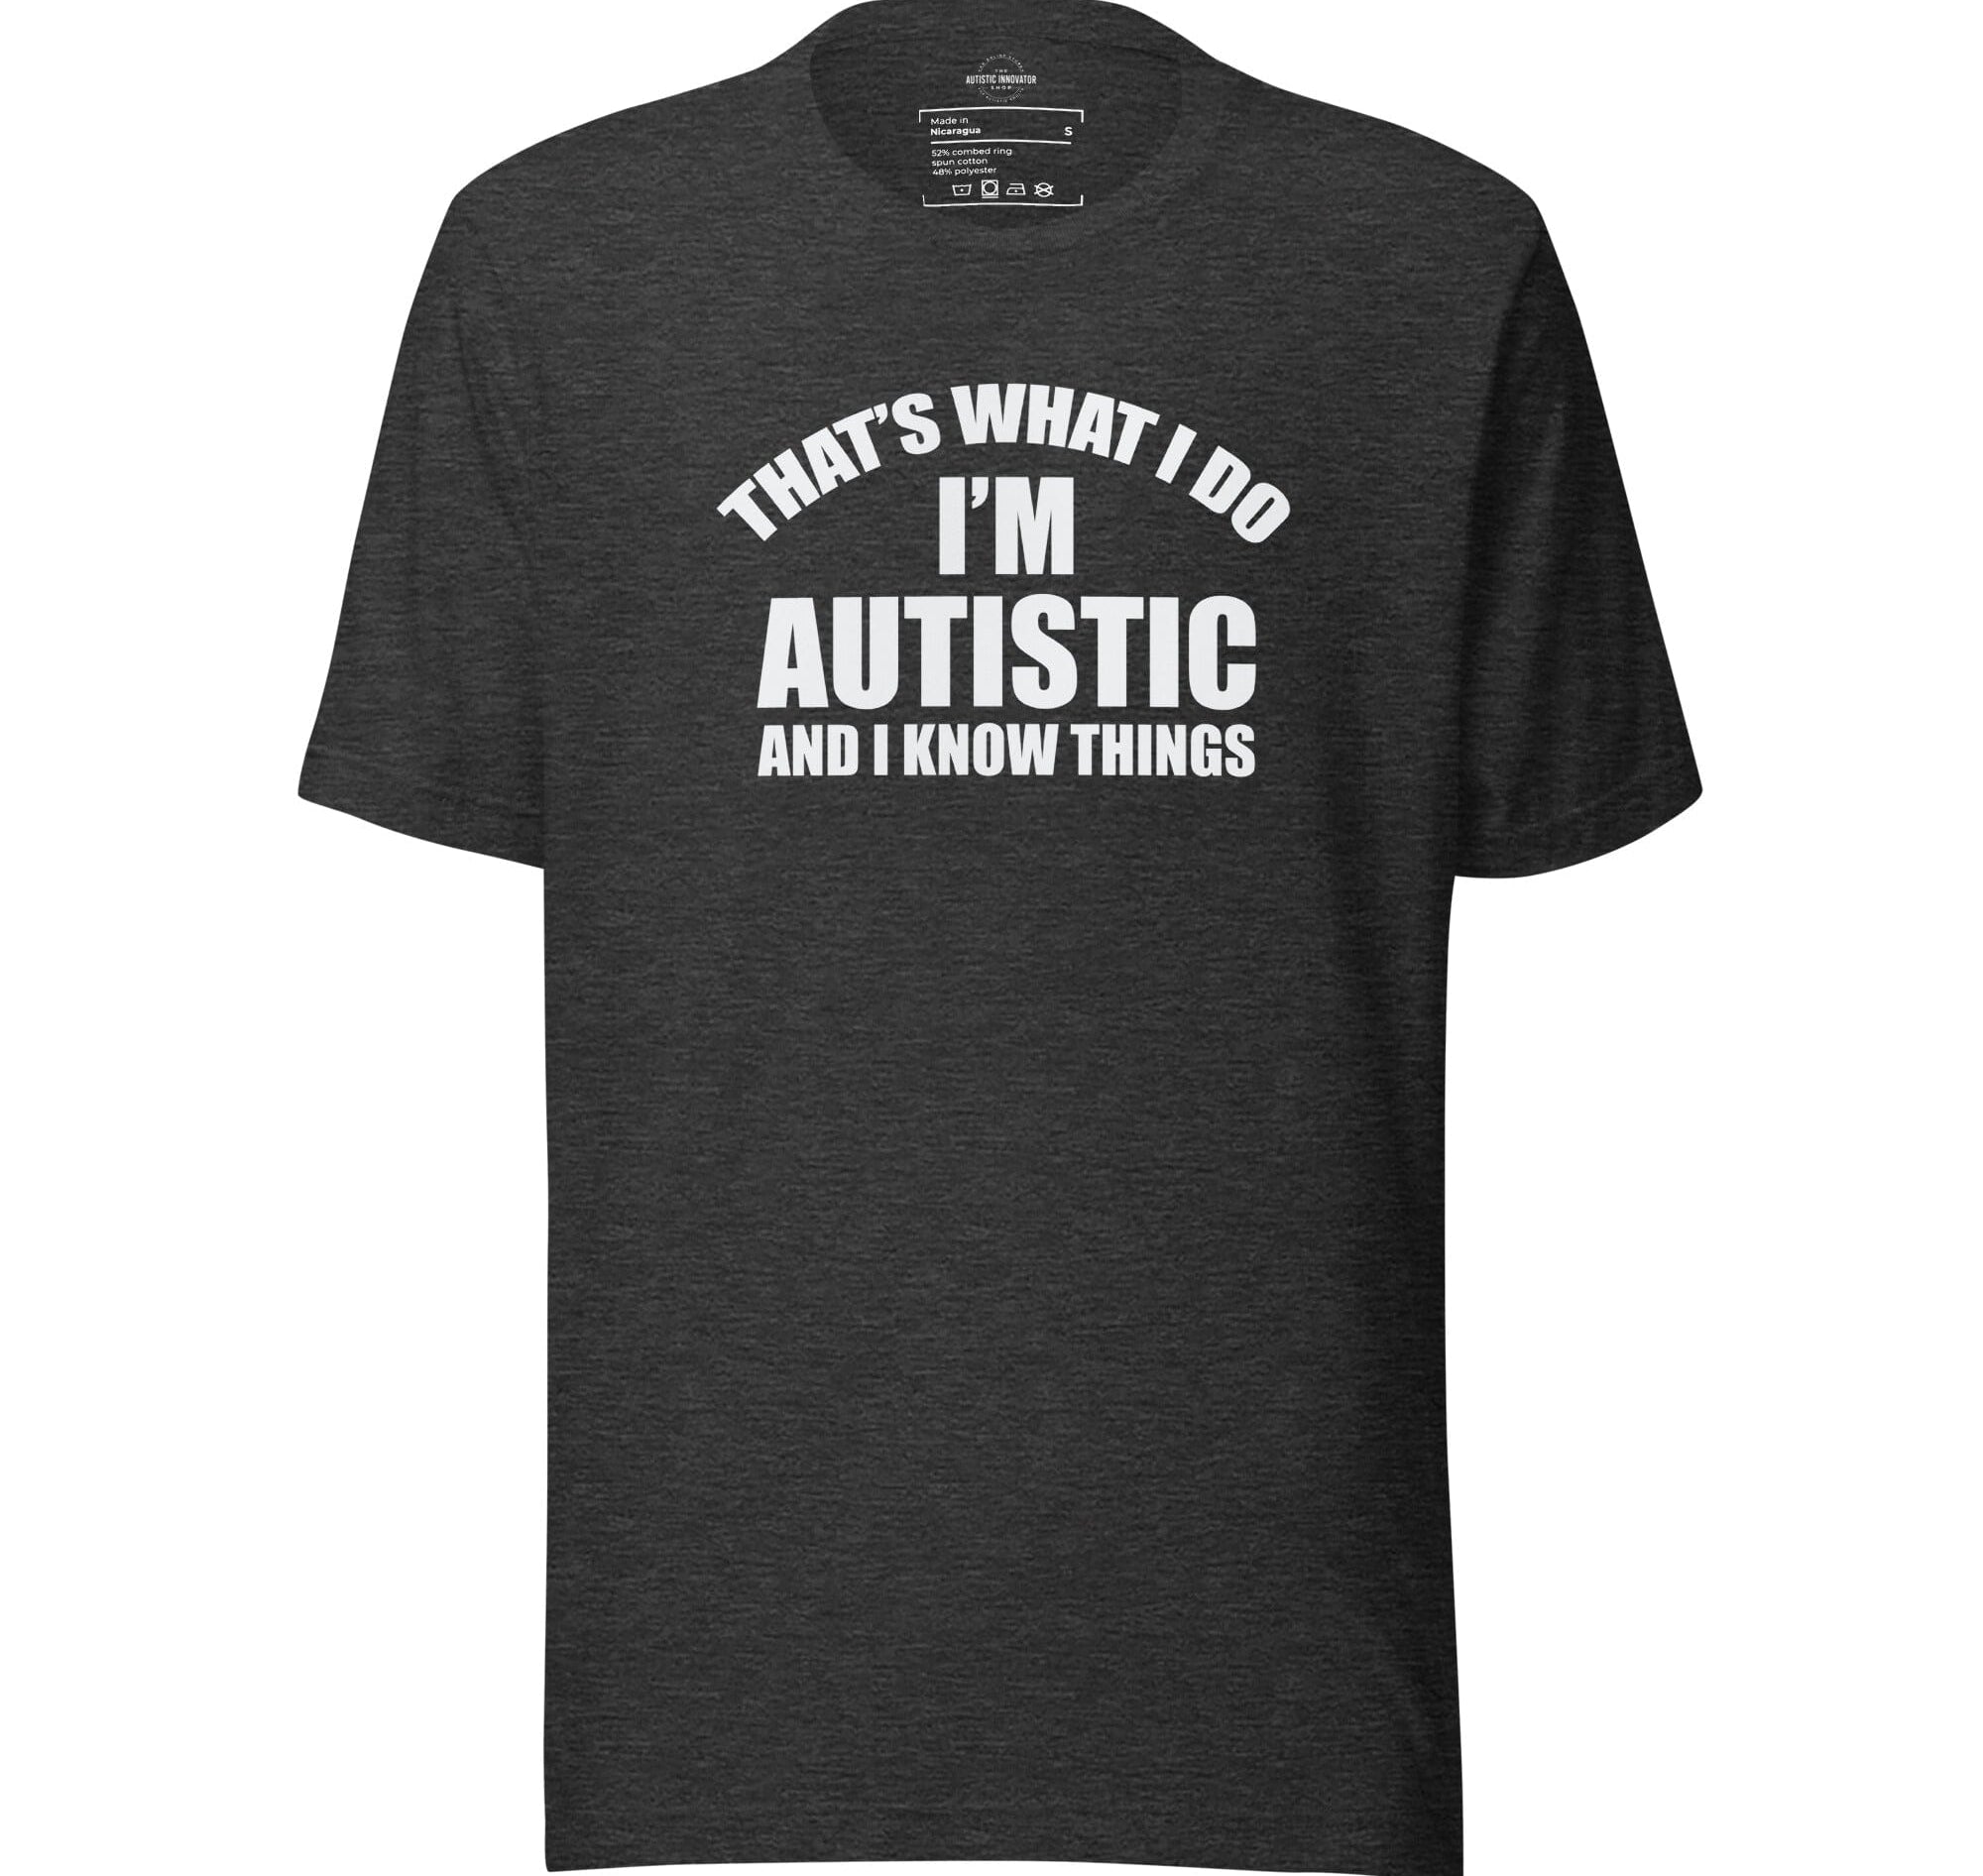 That's What I Do, I'm Autistic and I Know Things Unisex t-shirt The Autistic Innovator Dark Grey Heather S 